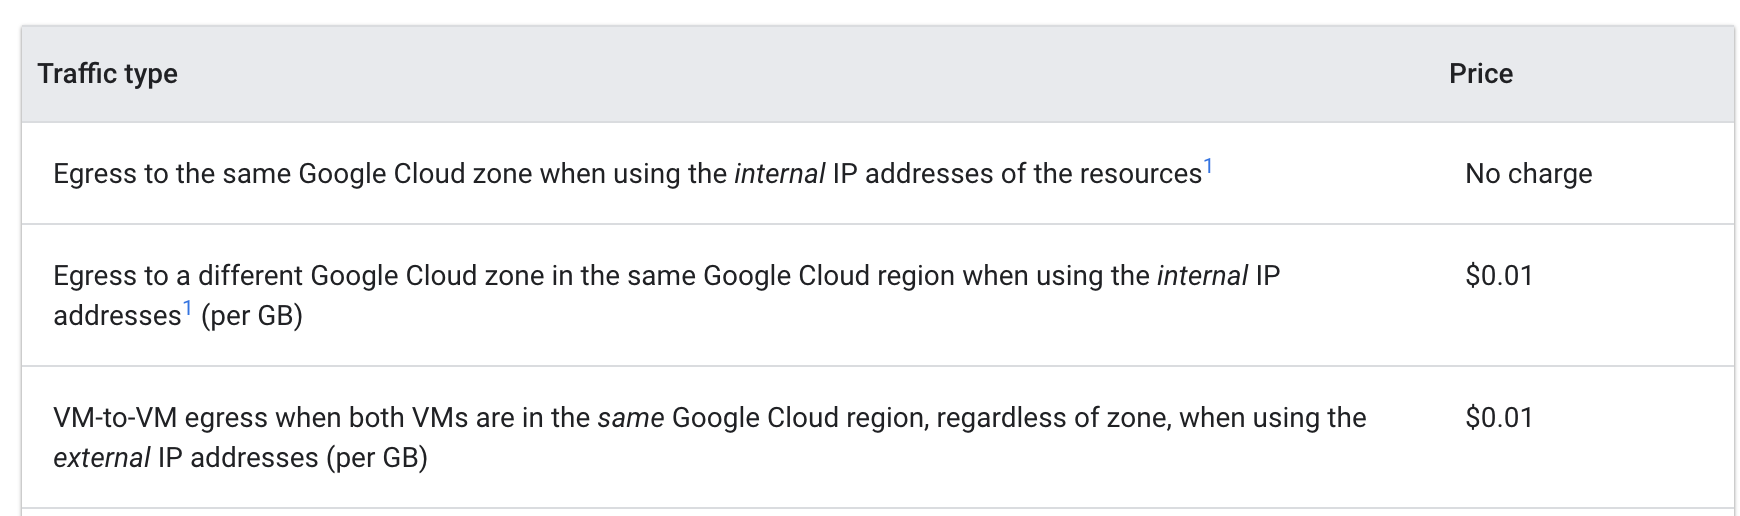 Three Google Cloud traffic types listed, along with their prices which range from $0 to $0.01 per GB.